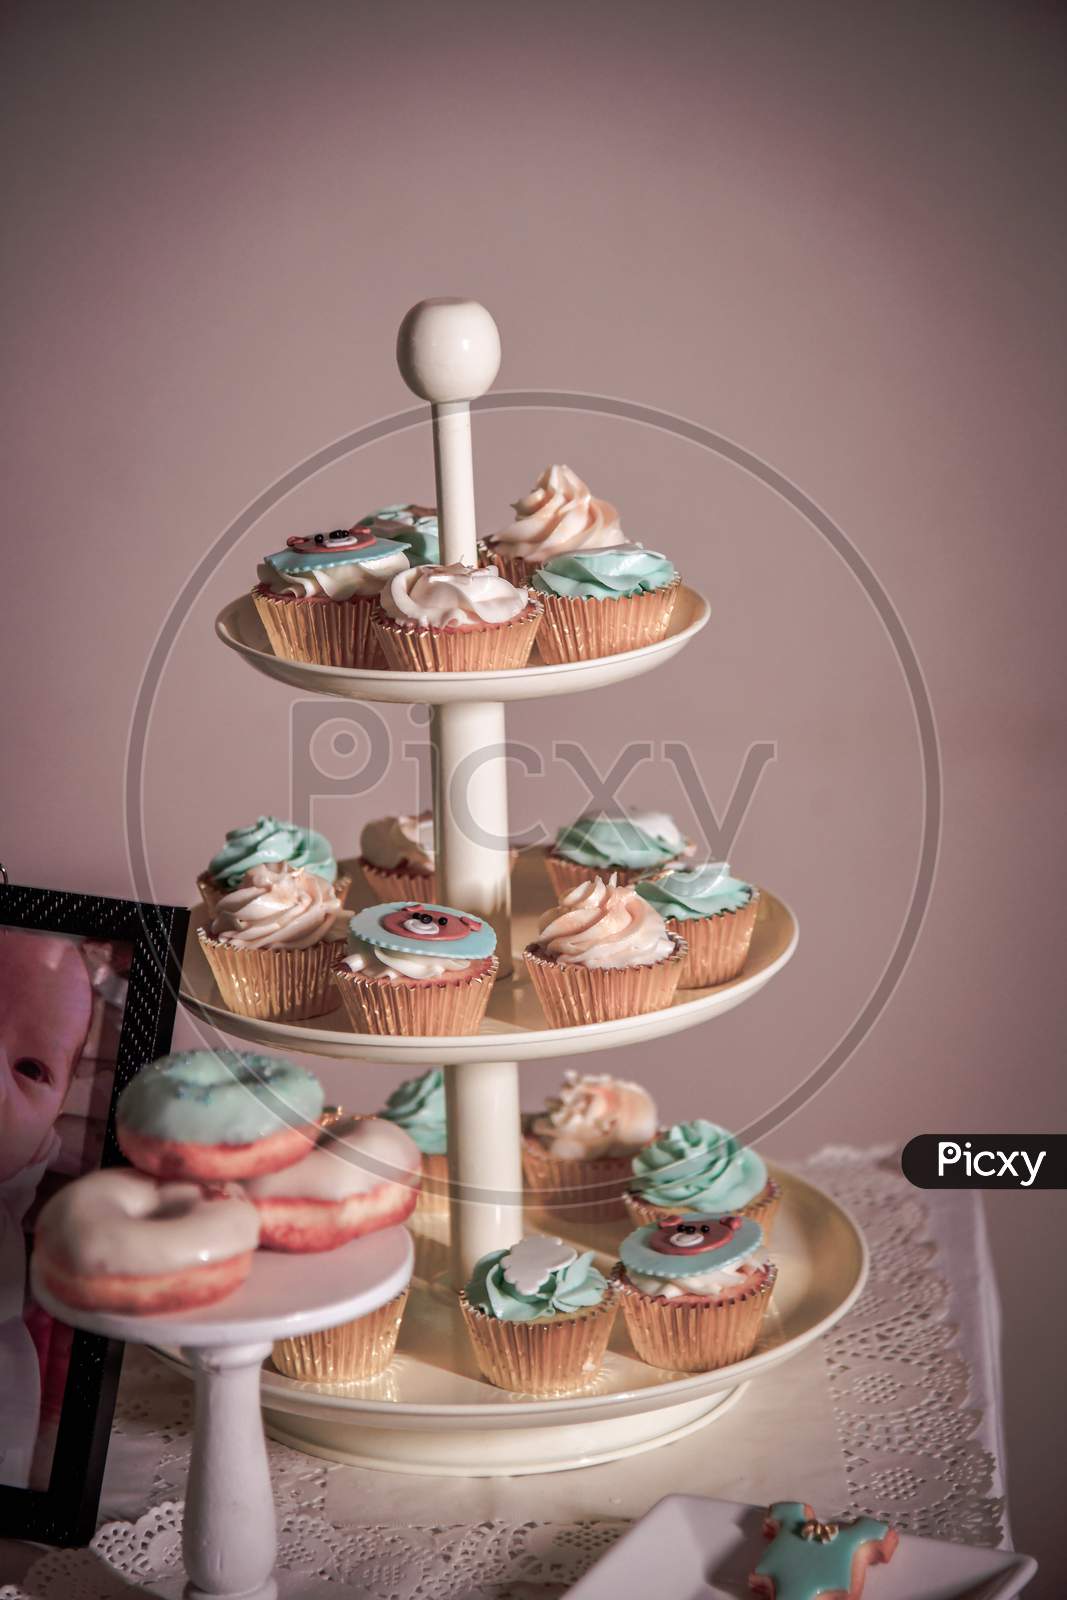 A dessert Table setting-Cup Cakes